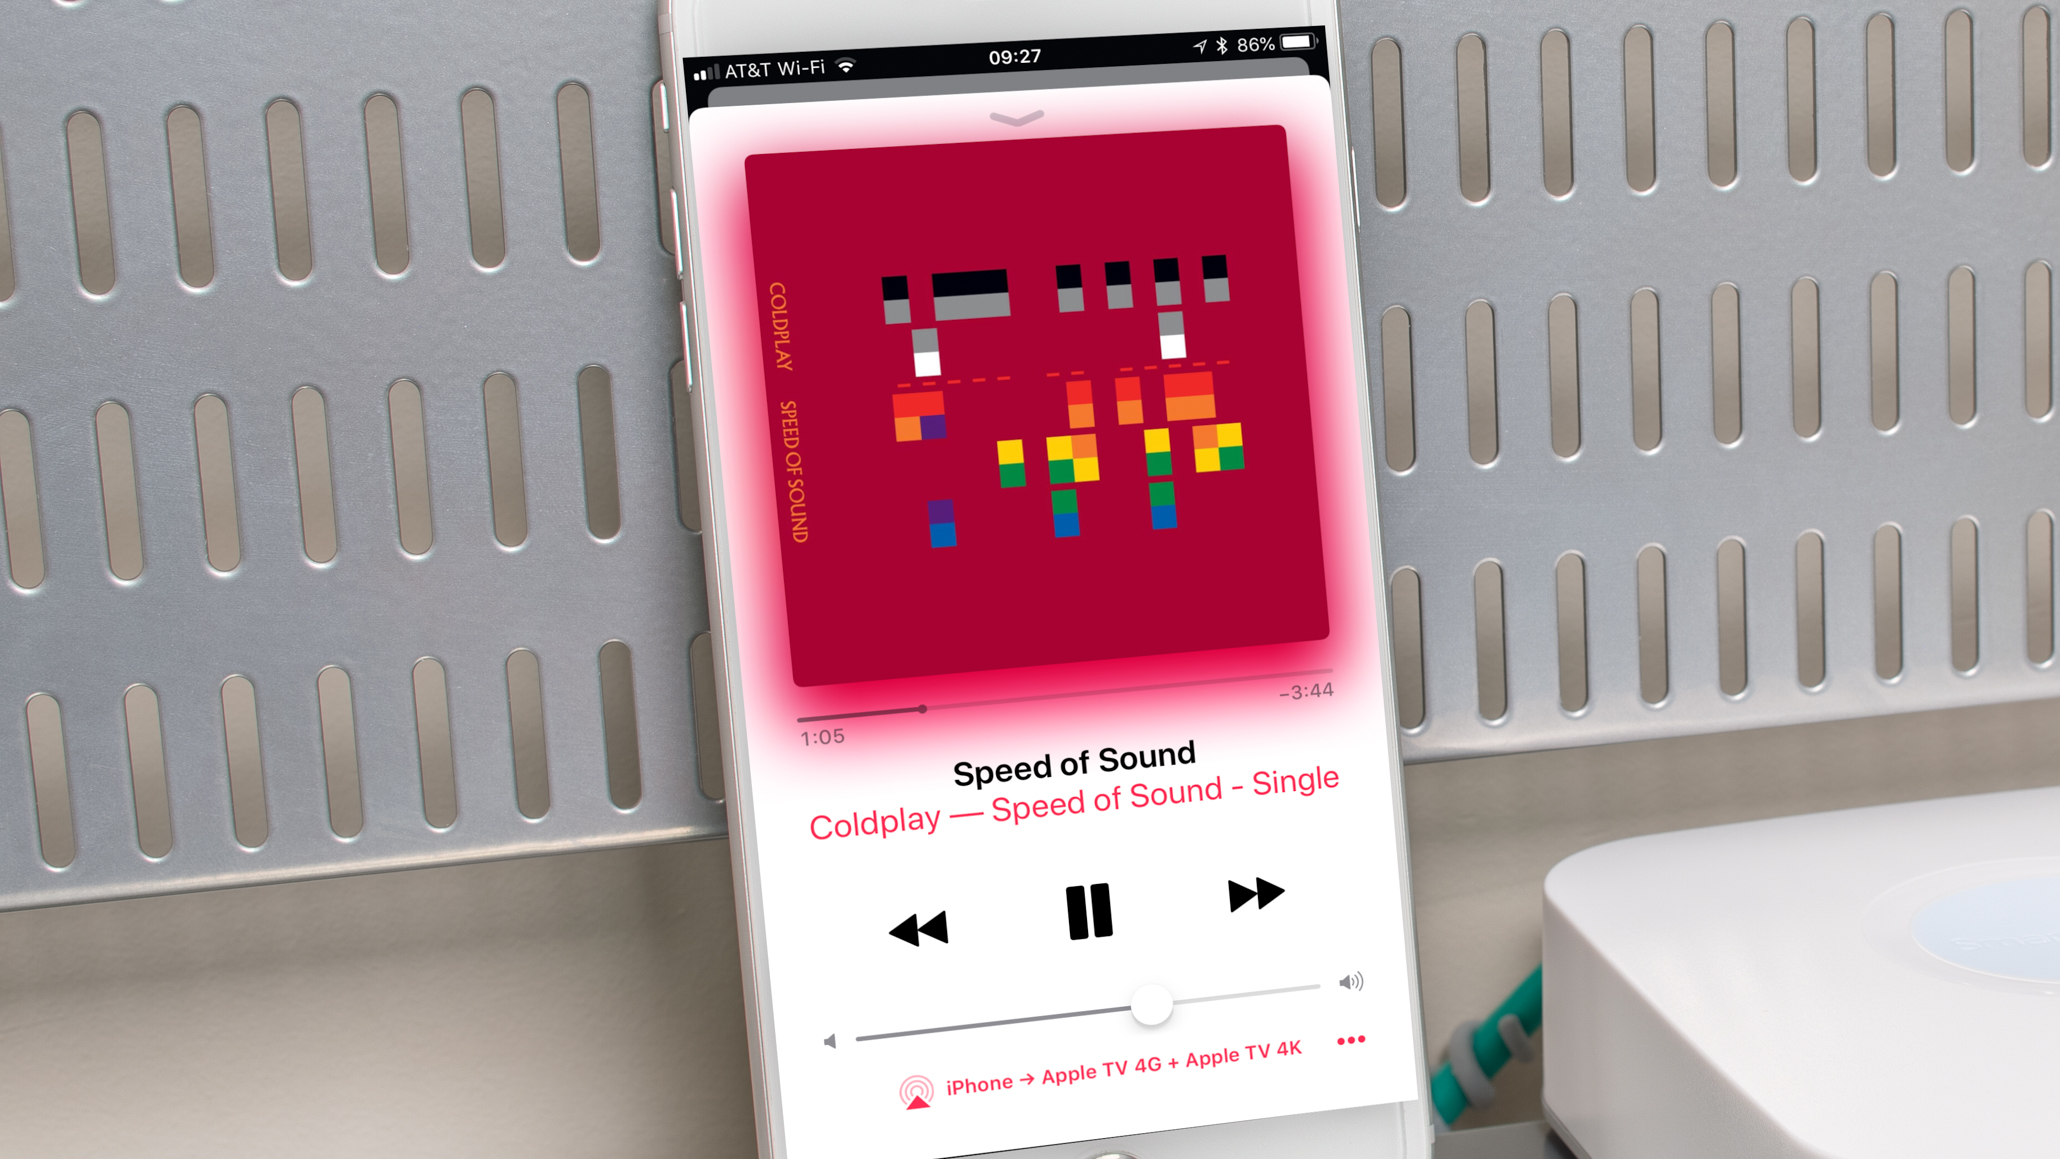 On iOS, the same AirPlay 2 controls appear within the ubiquitous Music app. Tapping the AirPlay icon at bottom left enables selecting from all available speakers or speaker pairs. Image: Digitized House Media.